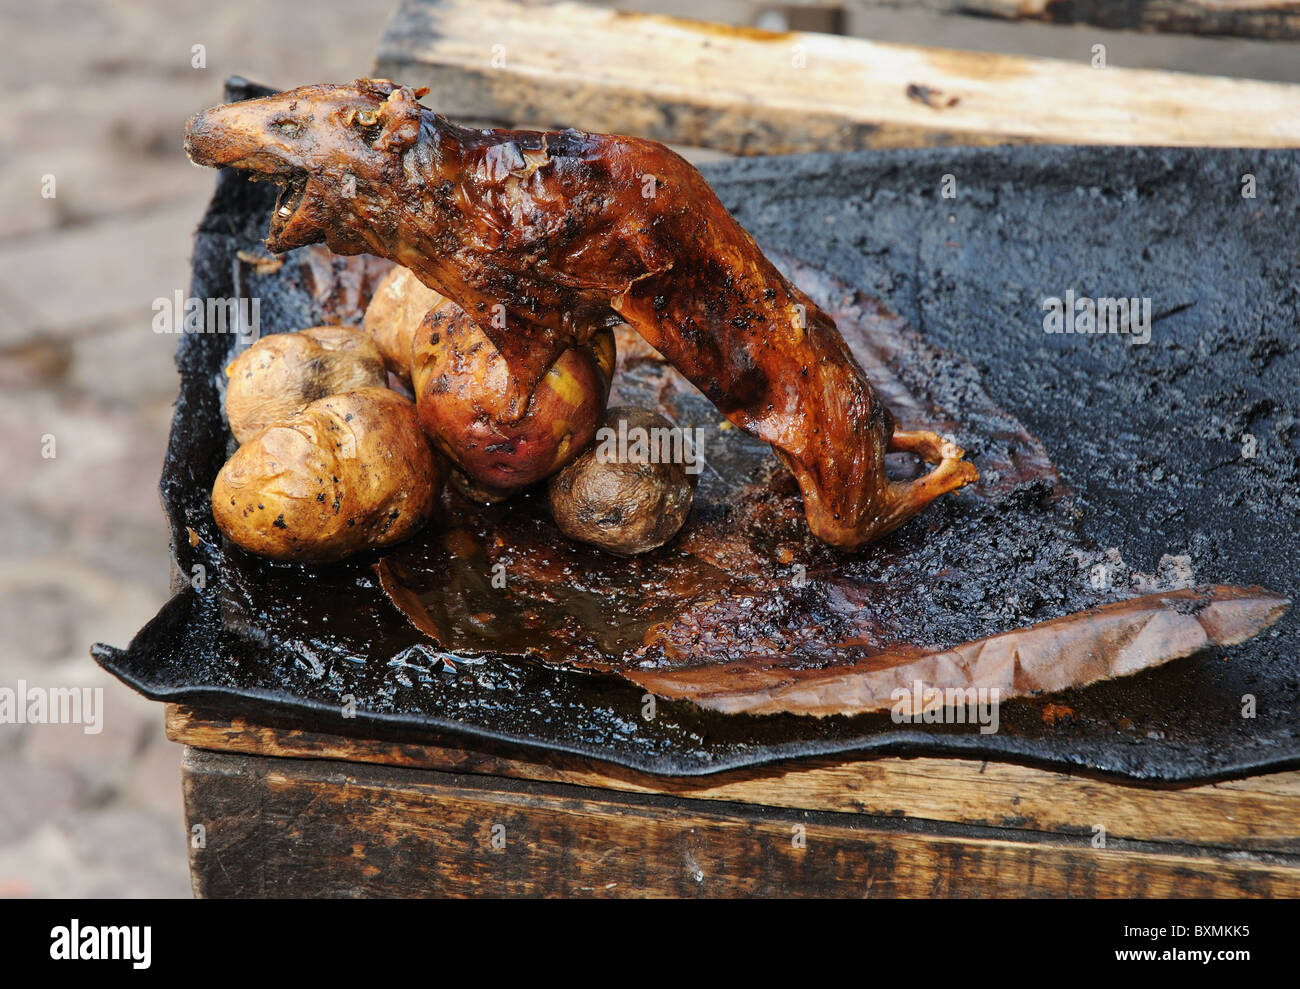 Roasted Guinea Pig with potatoes, a Peruvian delicacy. Stock Photo